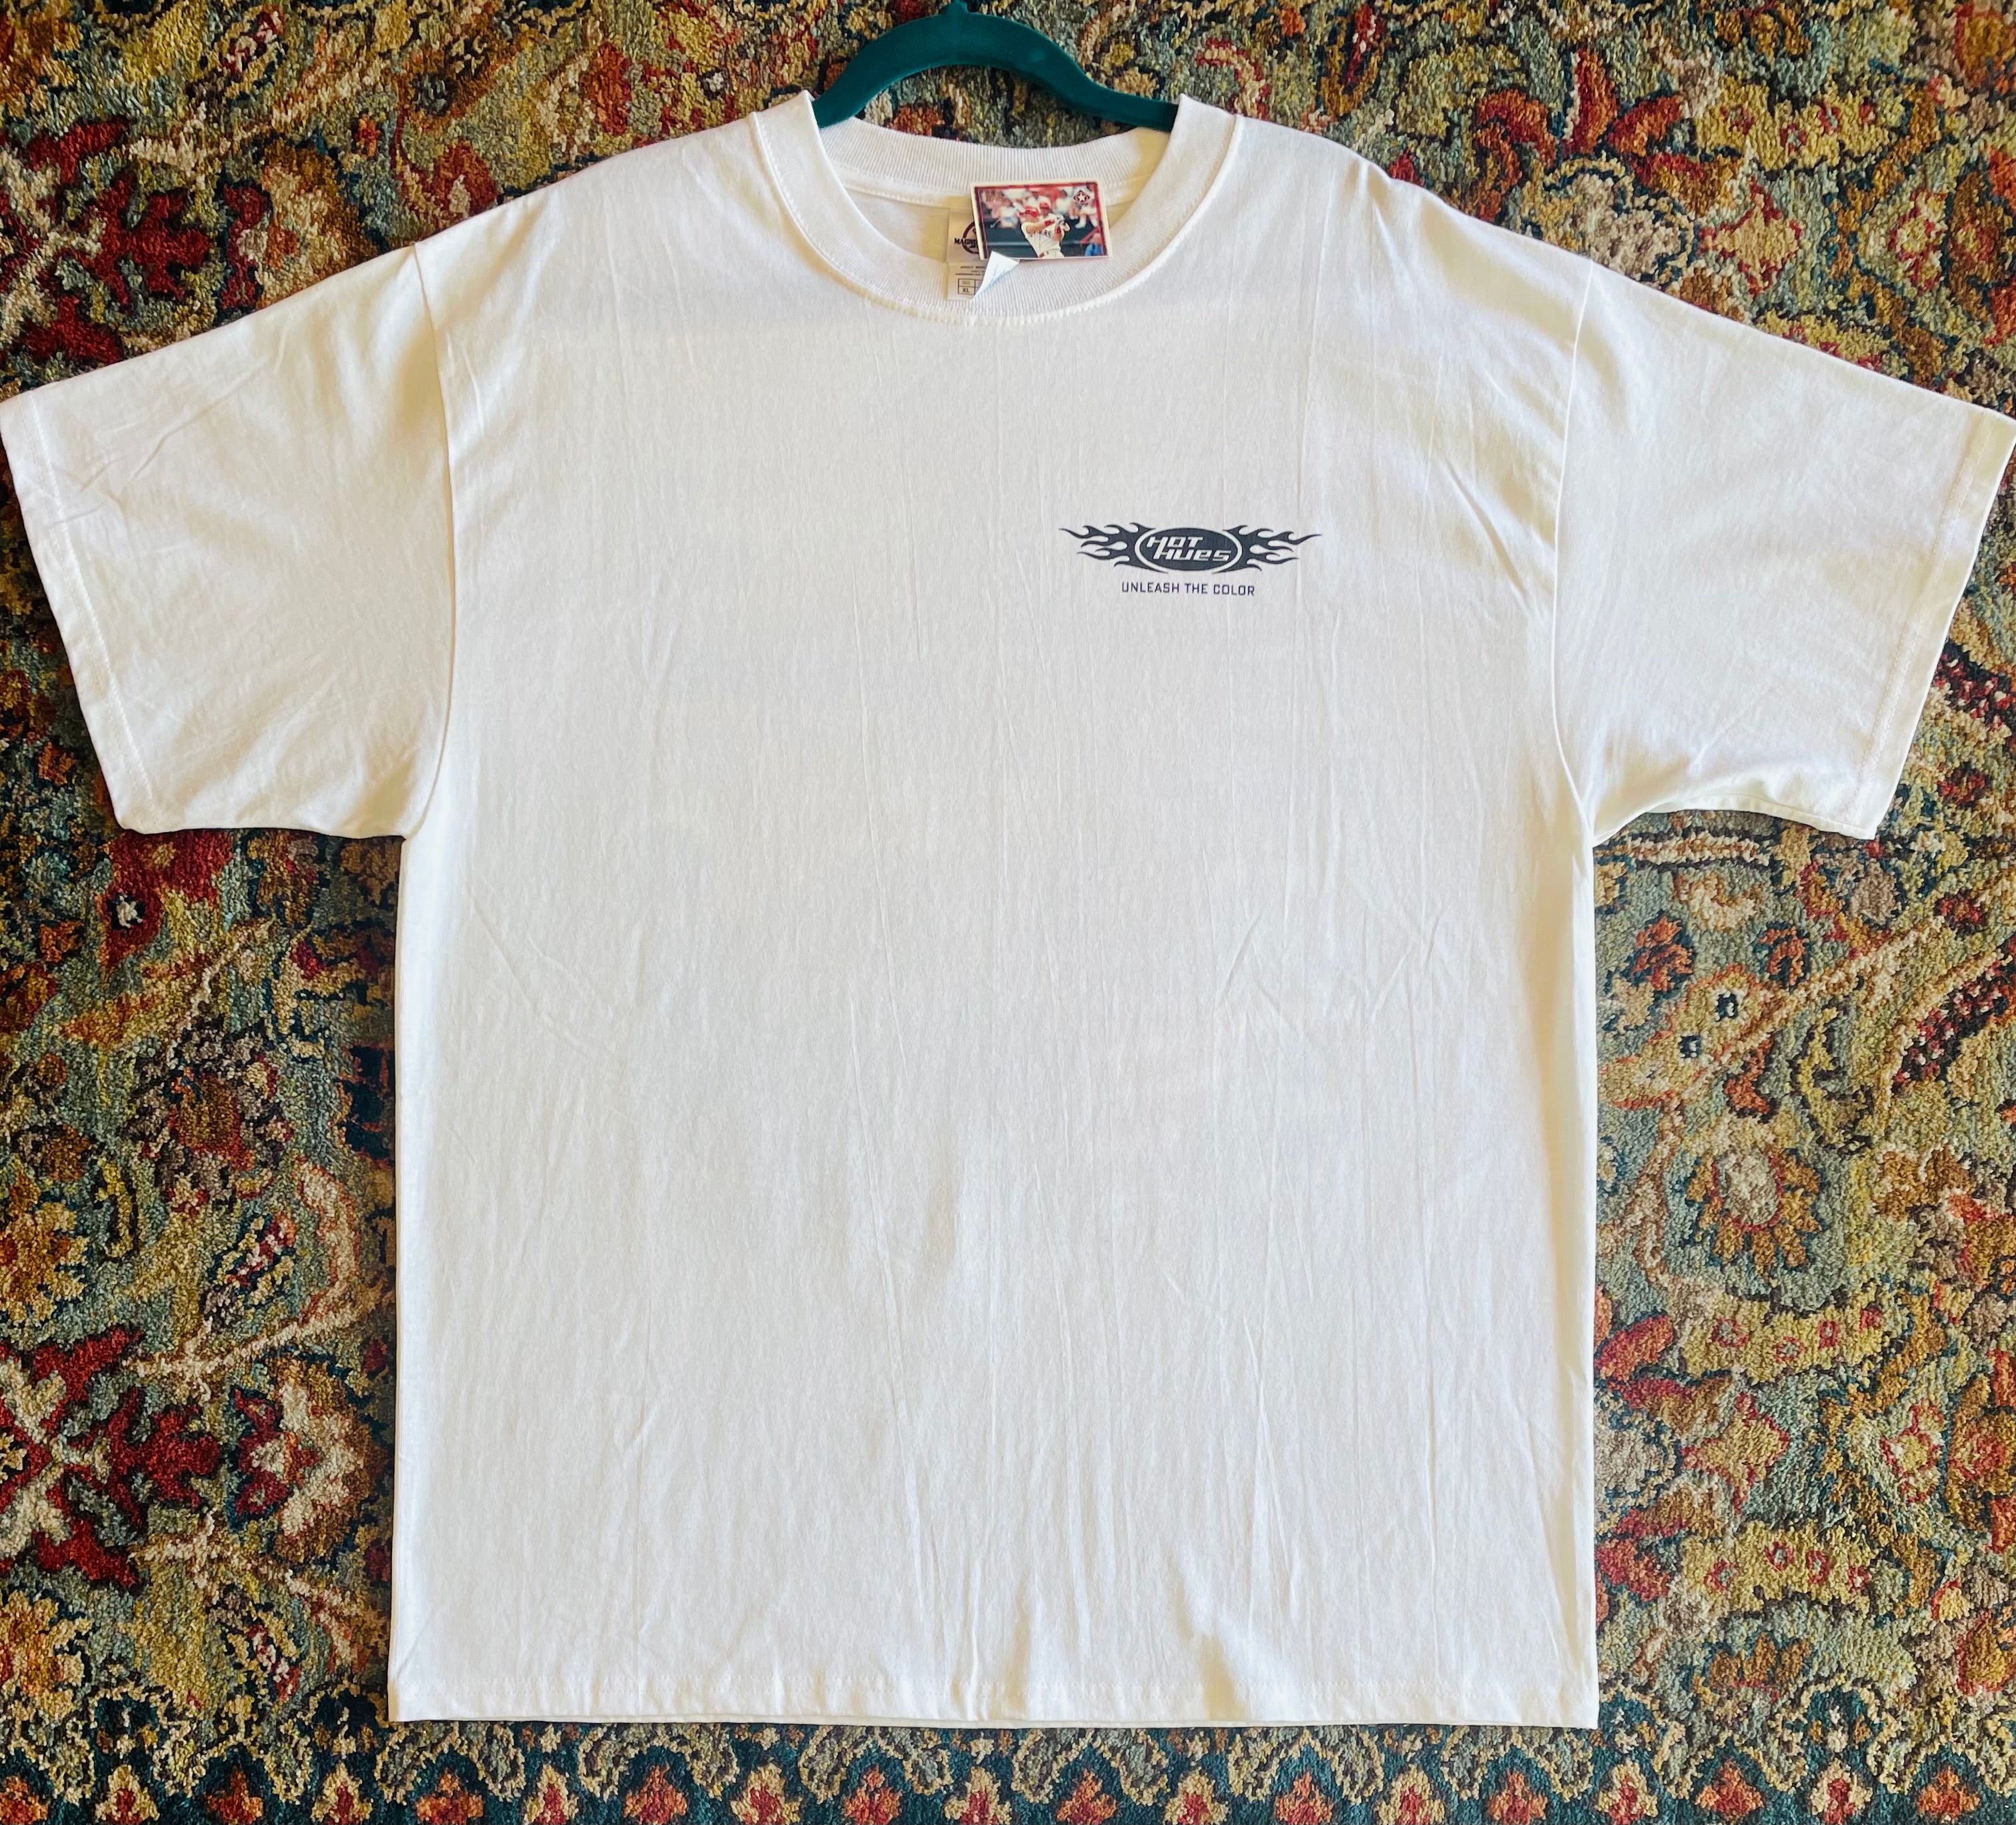 Y2k Dupont "Drive Your Dream Tee